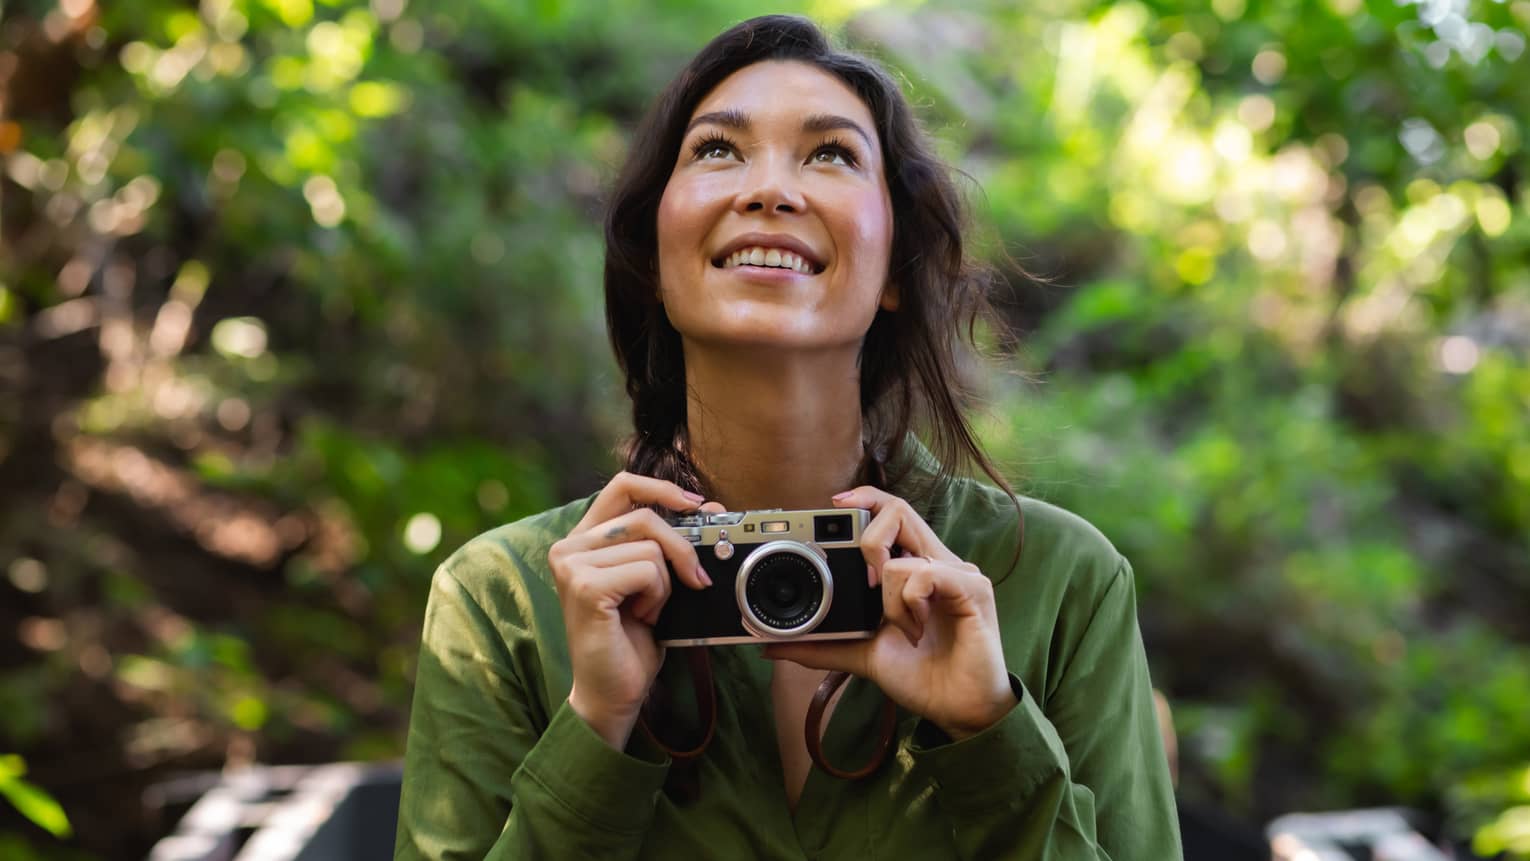 Woman with long dark hair wearing a green button-down shirt holds a camera as she looks upward in the forest